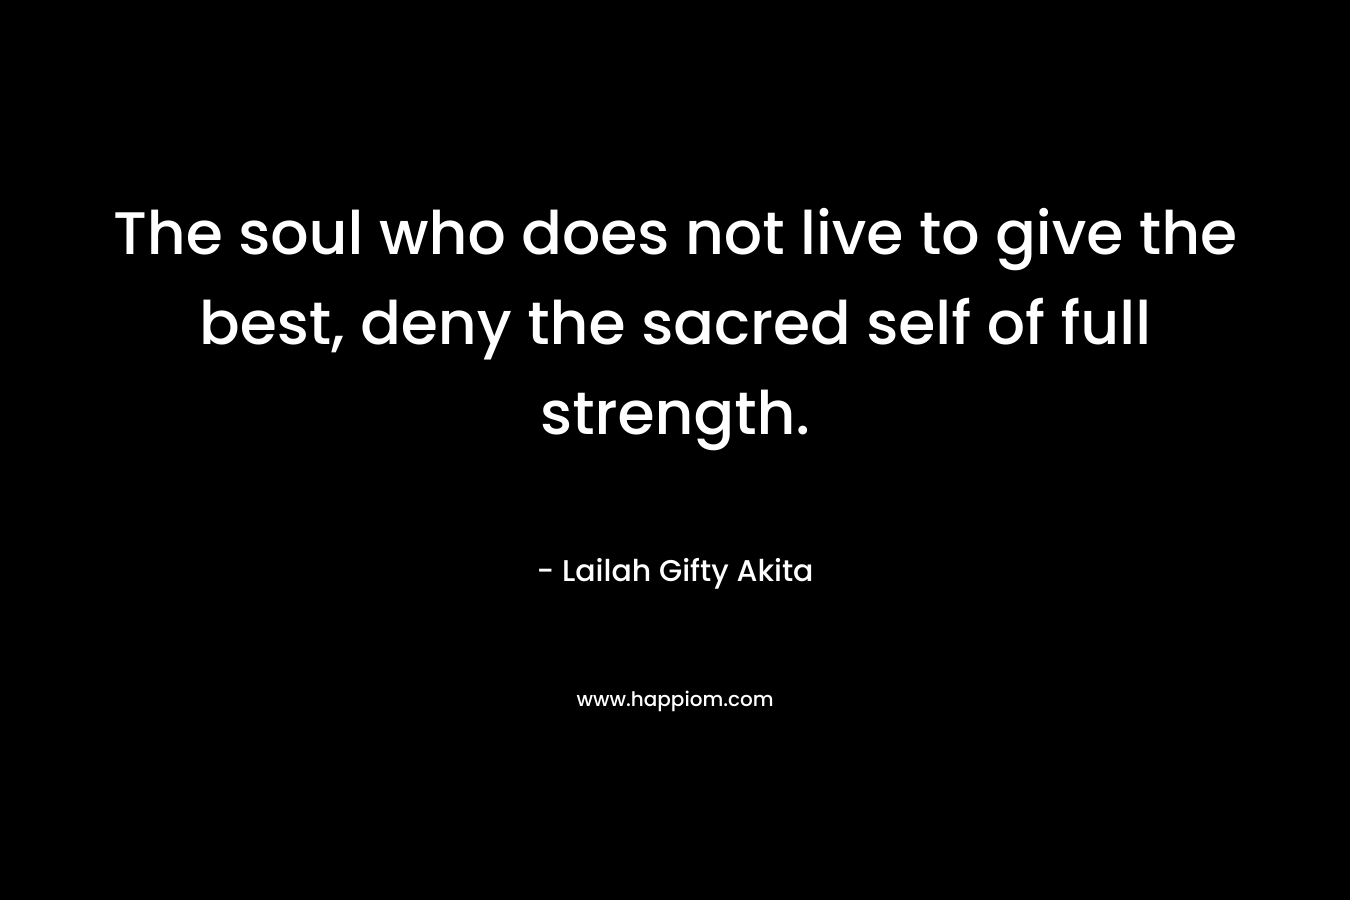 The soul who does not live to give the best, deny the sacred self of full strength.